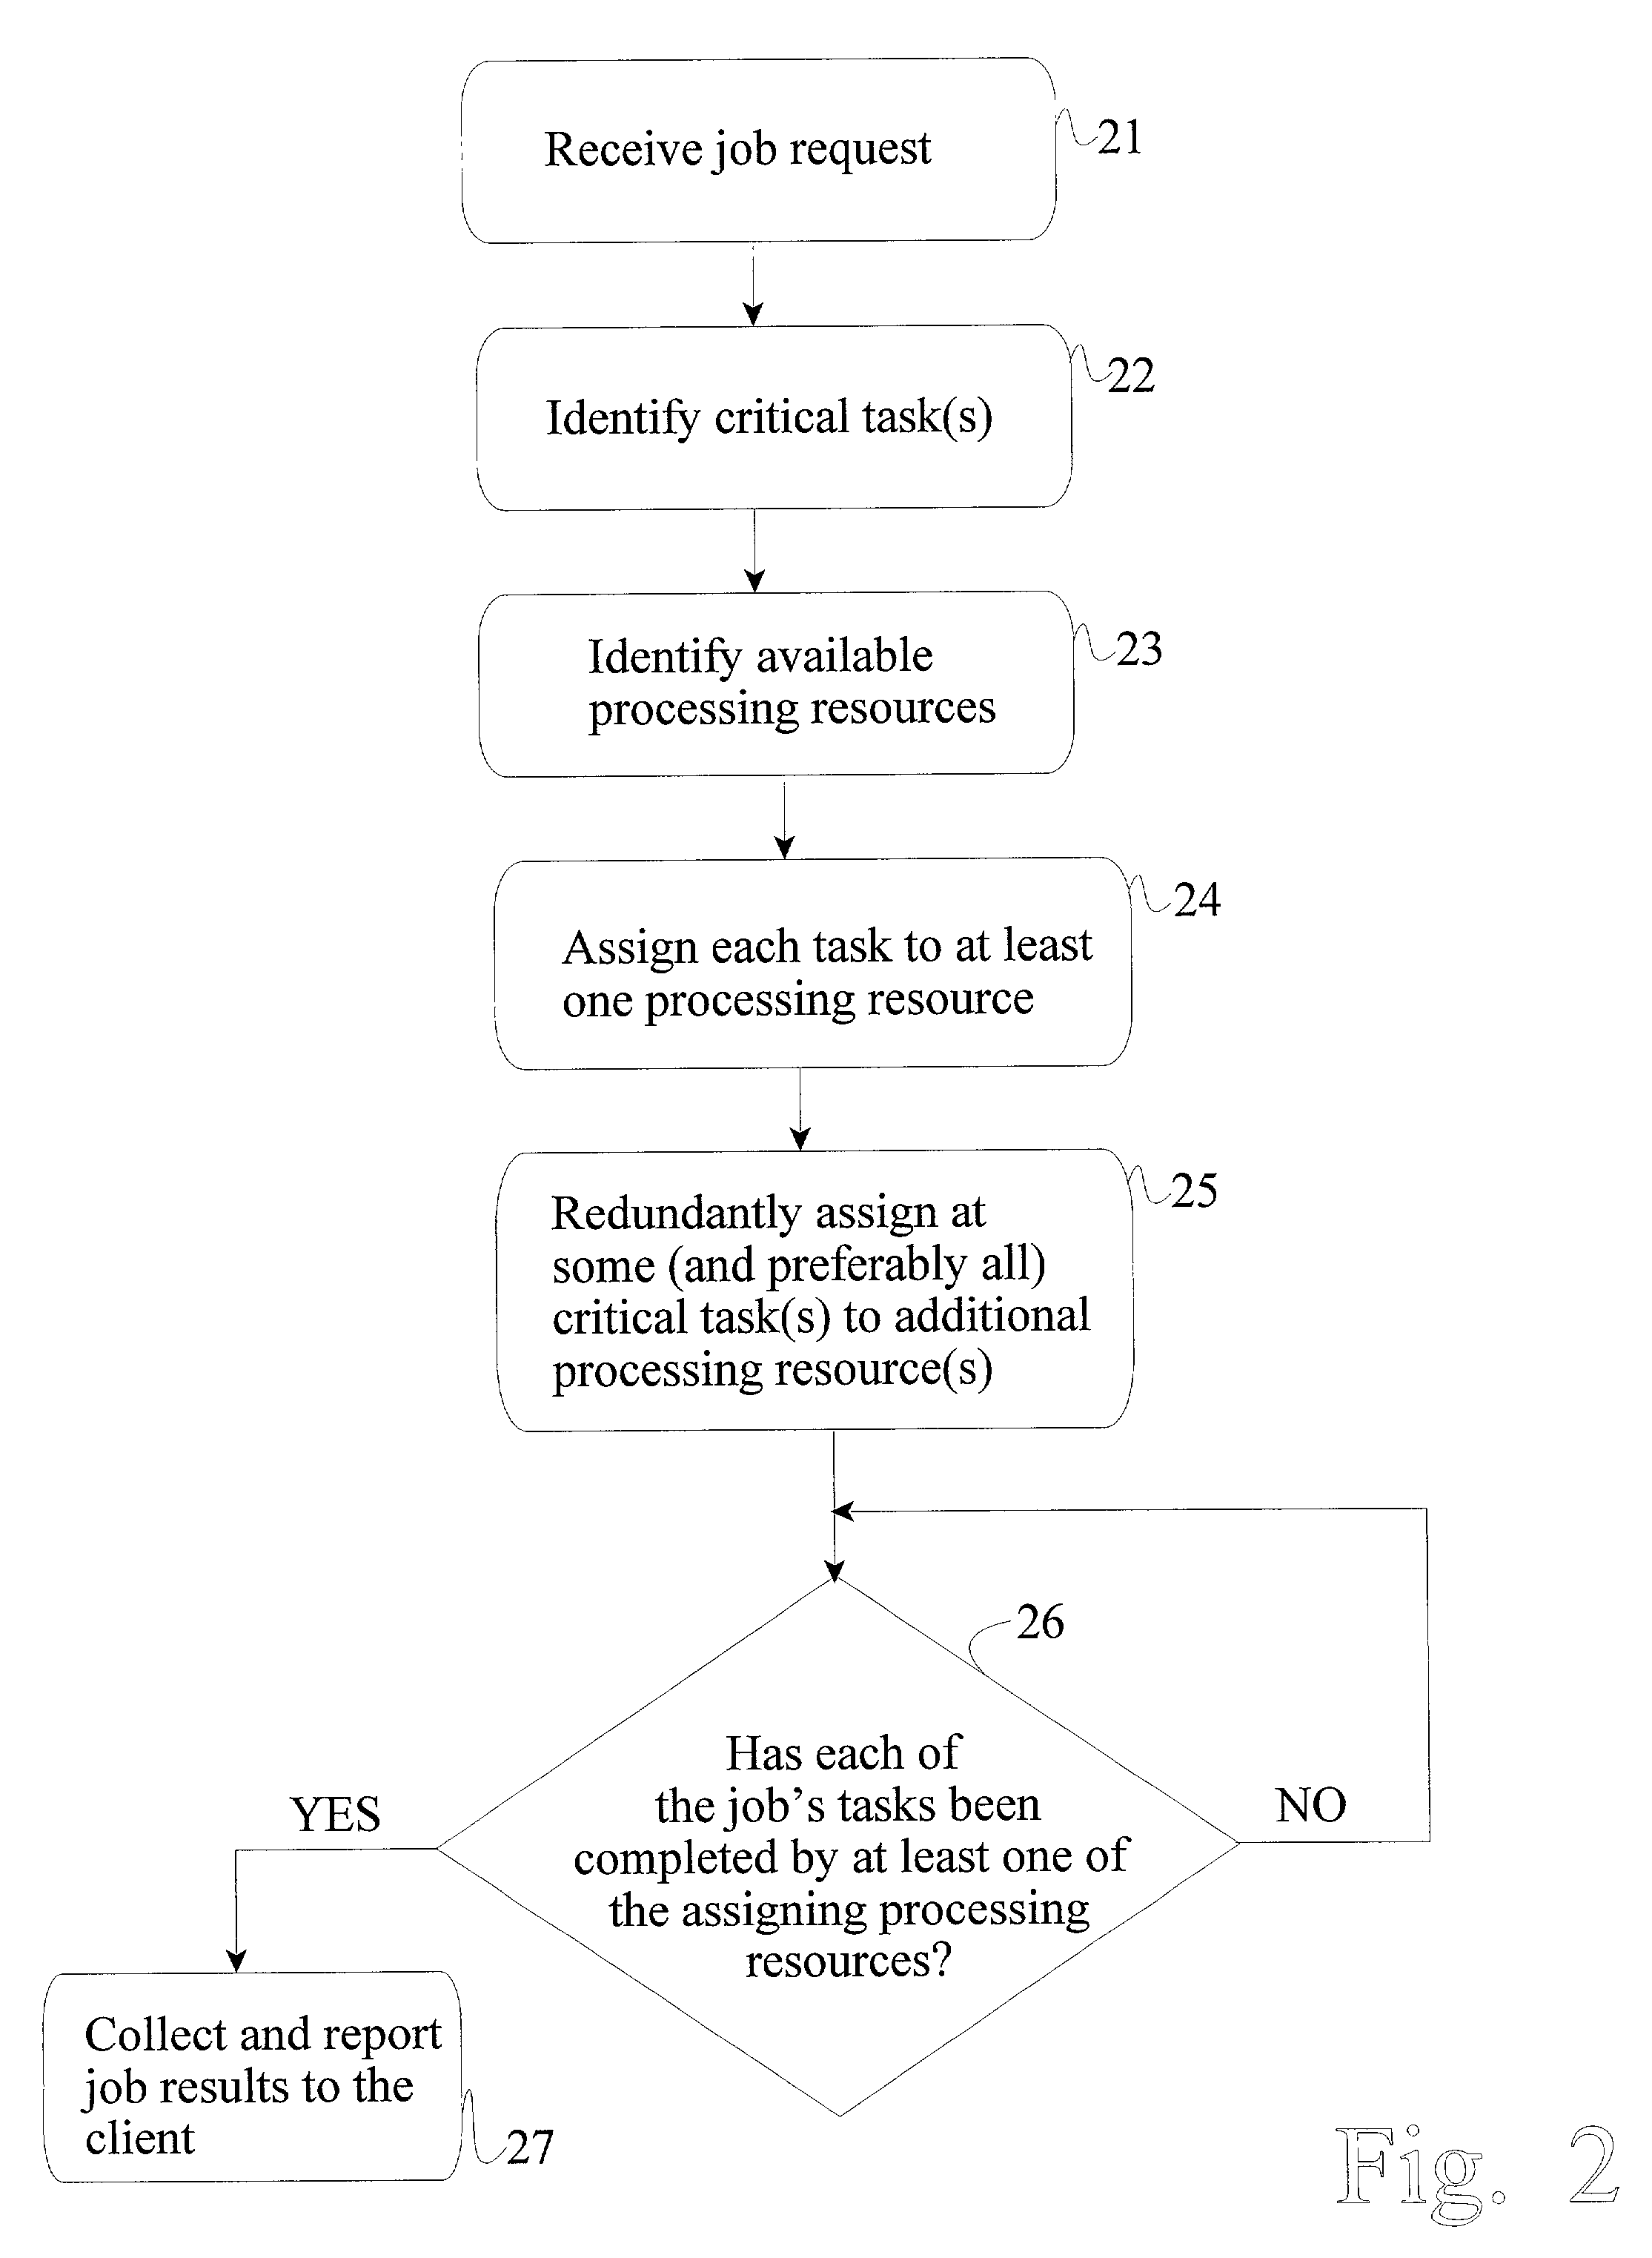 Redundancy-based methods, apparatus and articles-of-manufacture for providing improved quality-of-service in an always-live distributed computing environment